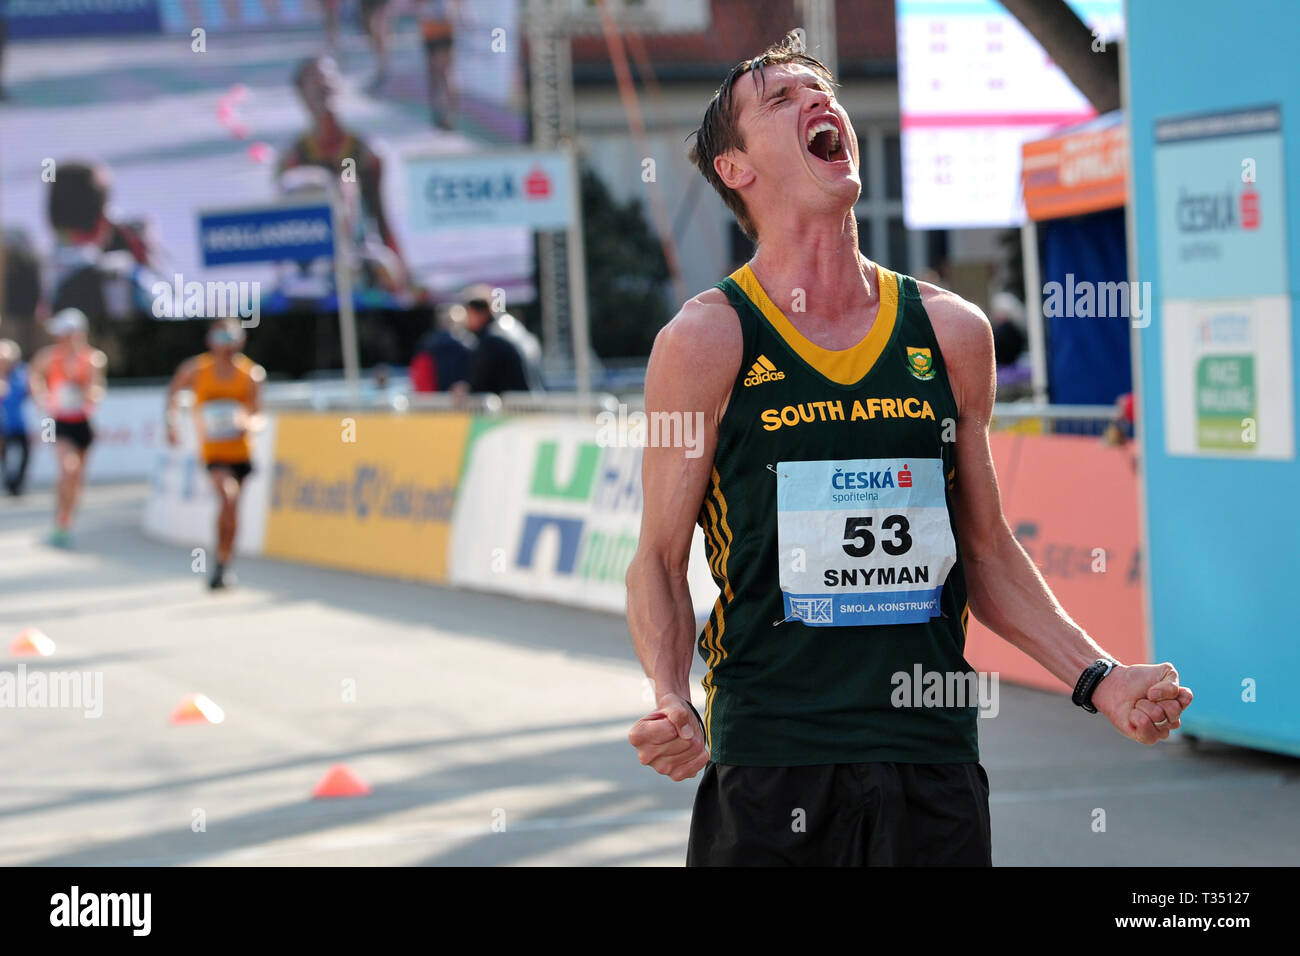 Podebrady, Czech Republic. 6th Apr, 2019. Wayne Snyman of South Africa celebrates second place the men's 20km walk of the International match and EA Race Walking Permit Meeting at Podebrady on April 06, 2019 in Podebrady in the Czech Republic. Credit: Slavek Ruta/ZUMA Wire/Alamy Live News Stock Photo